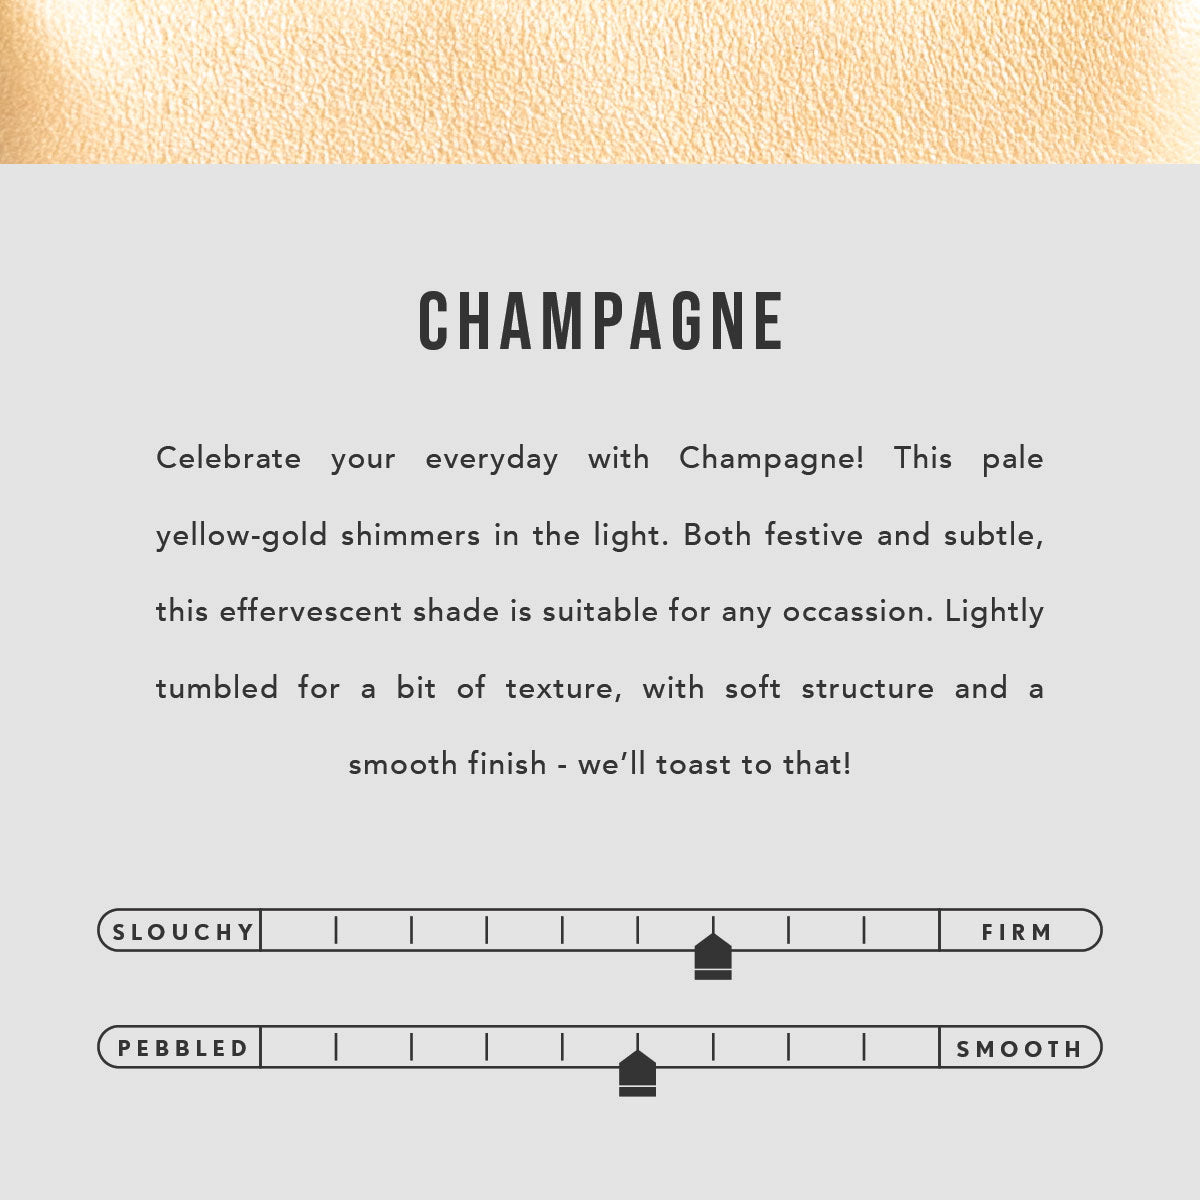 Champagne*Classic | infographic